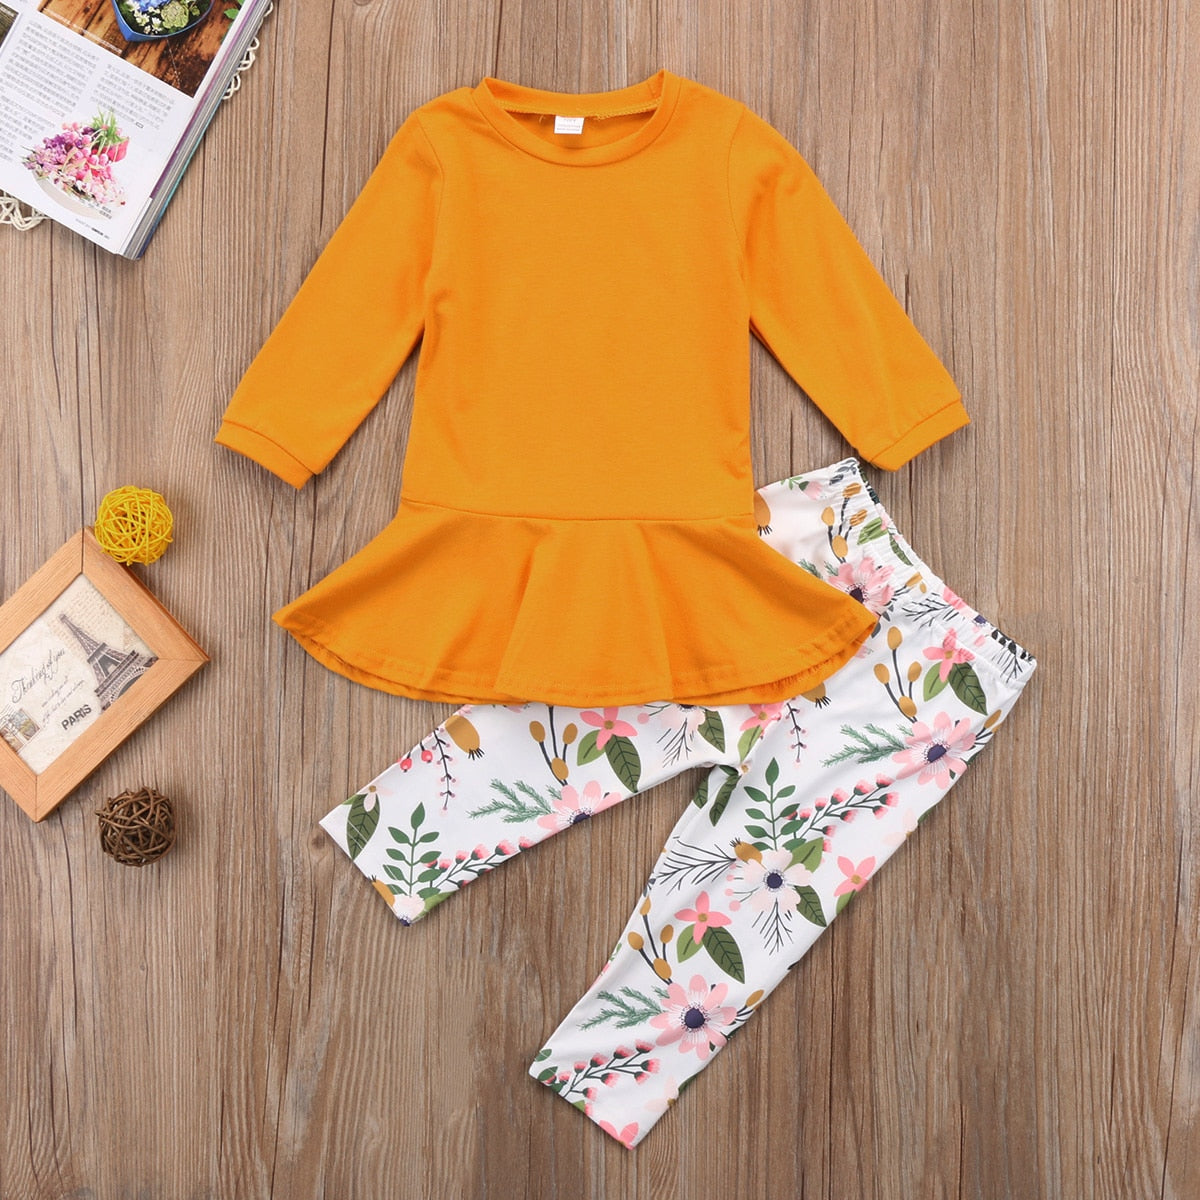 Fashion Flower 2-7Y Toddler Kids Girls Outfits Clothes Long Sleeve T-shirt Tops +Long Pants Casual Set Warm - ebowsos